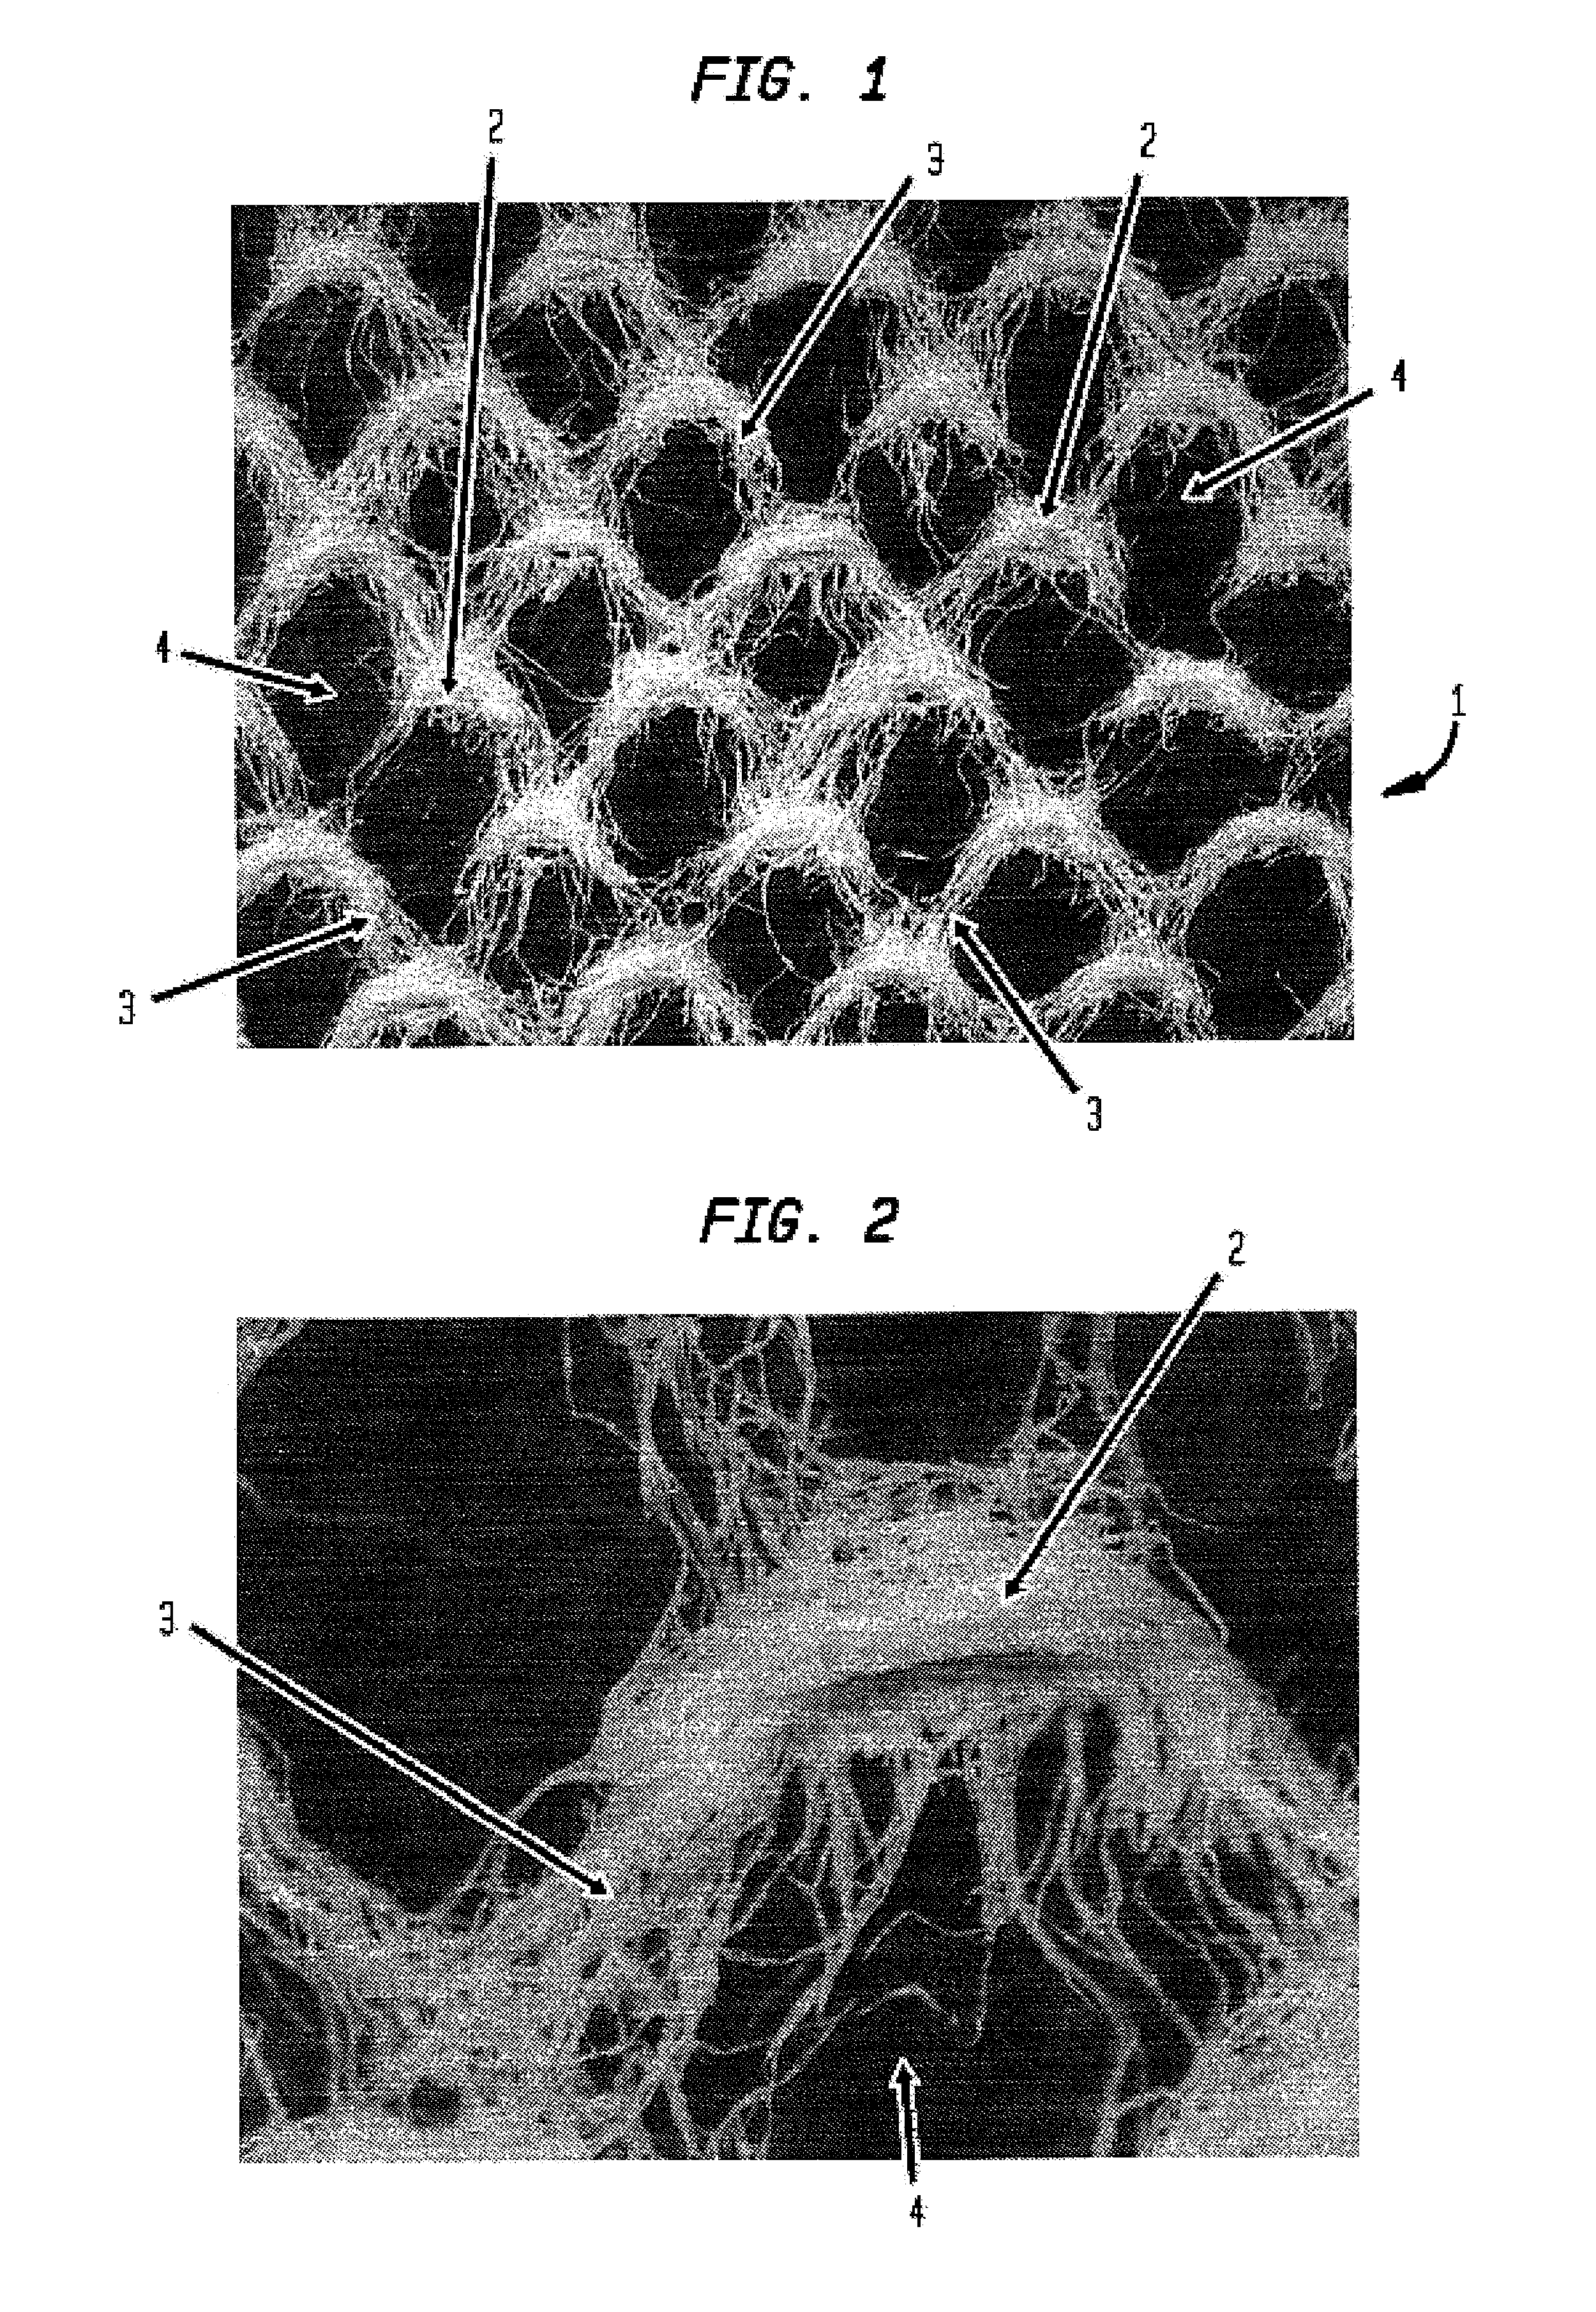 Fabric crepe process for making absorbent sheet